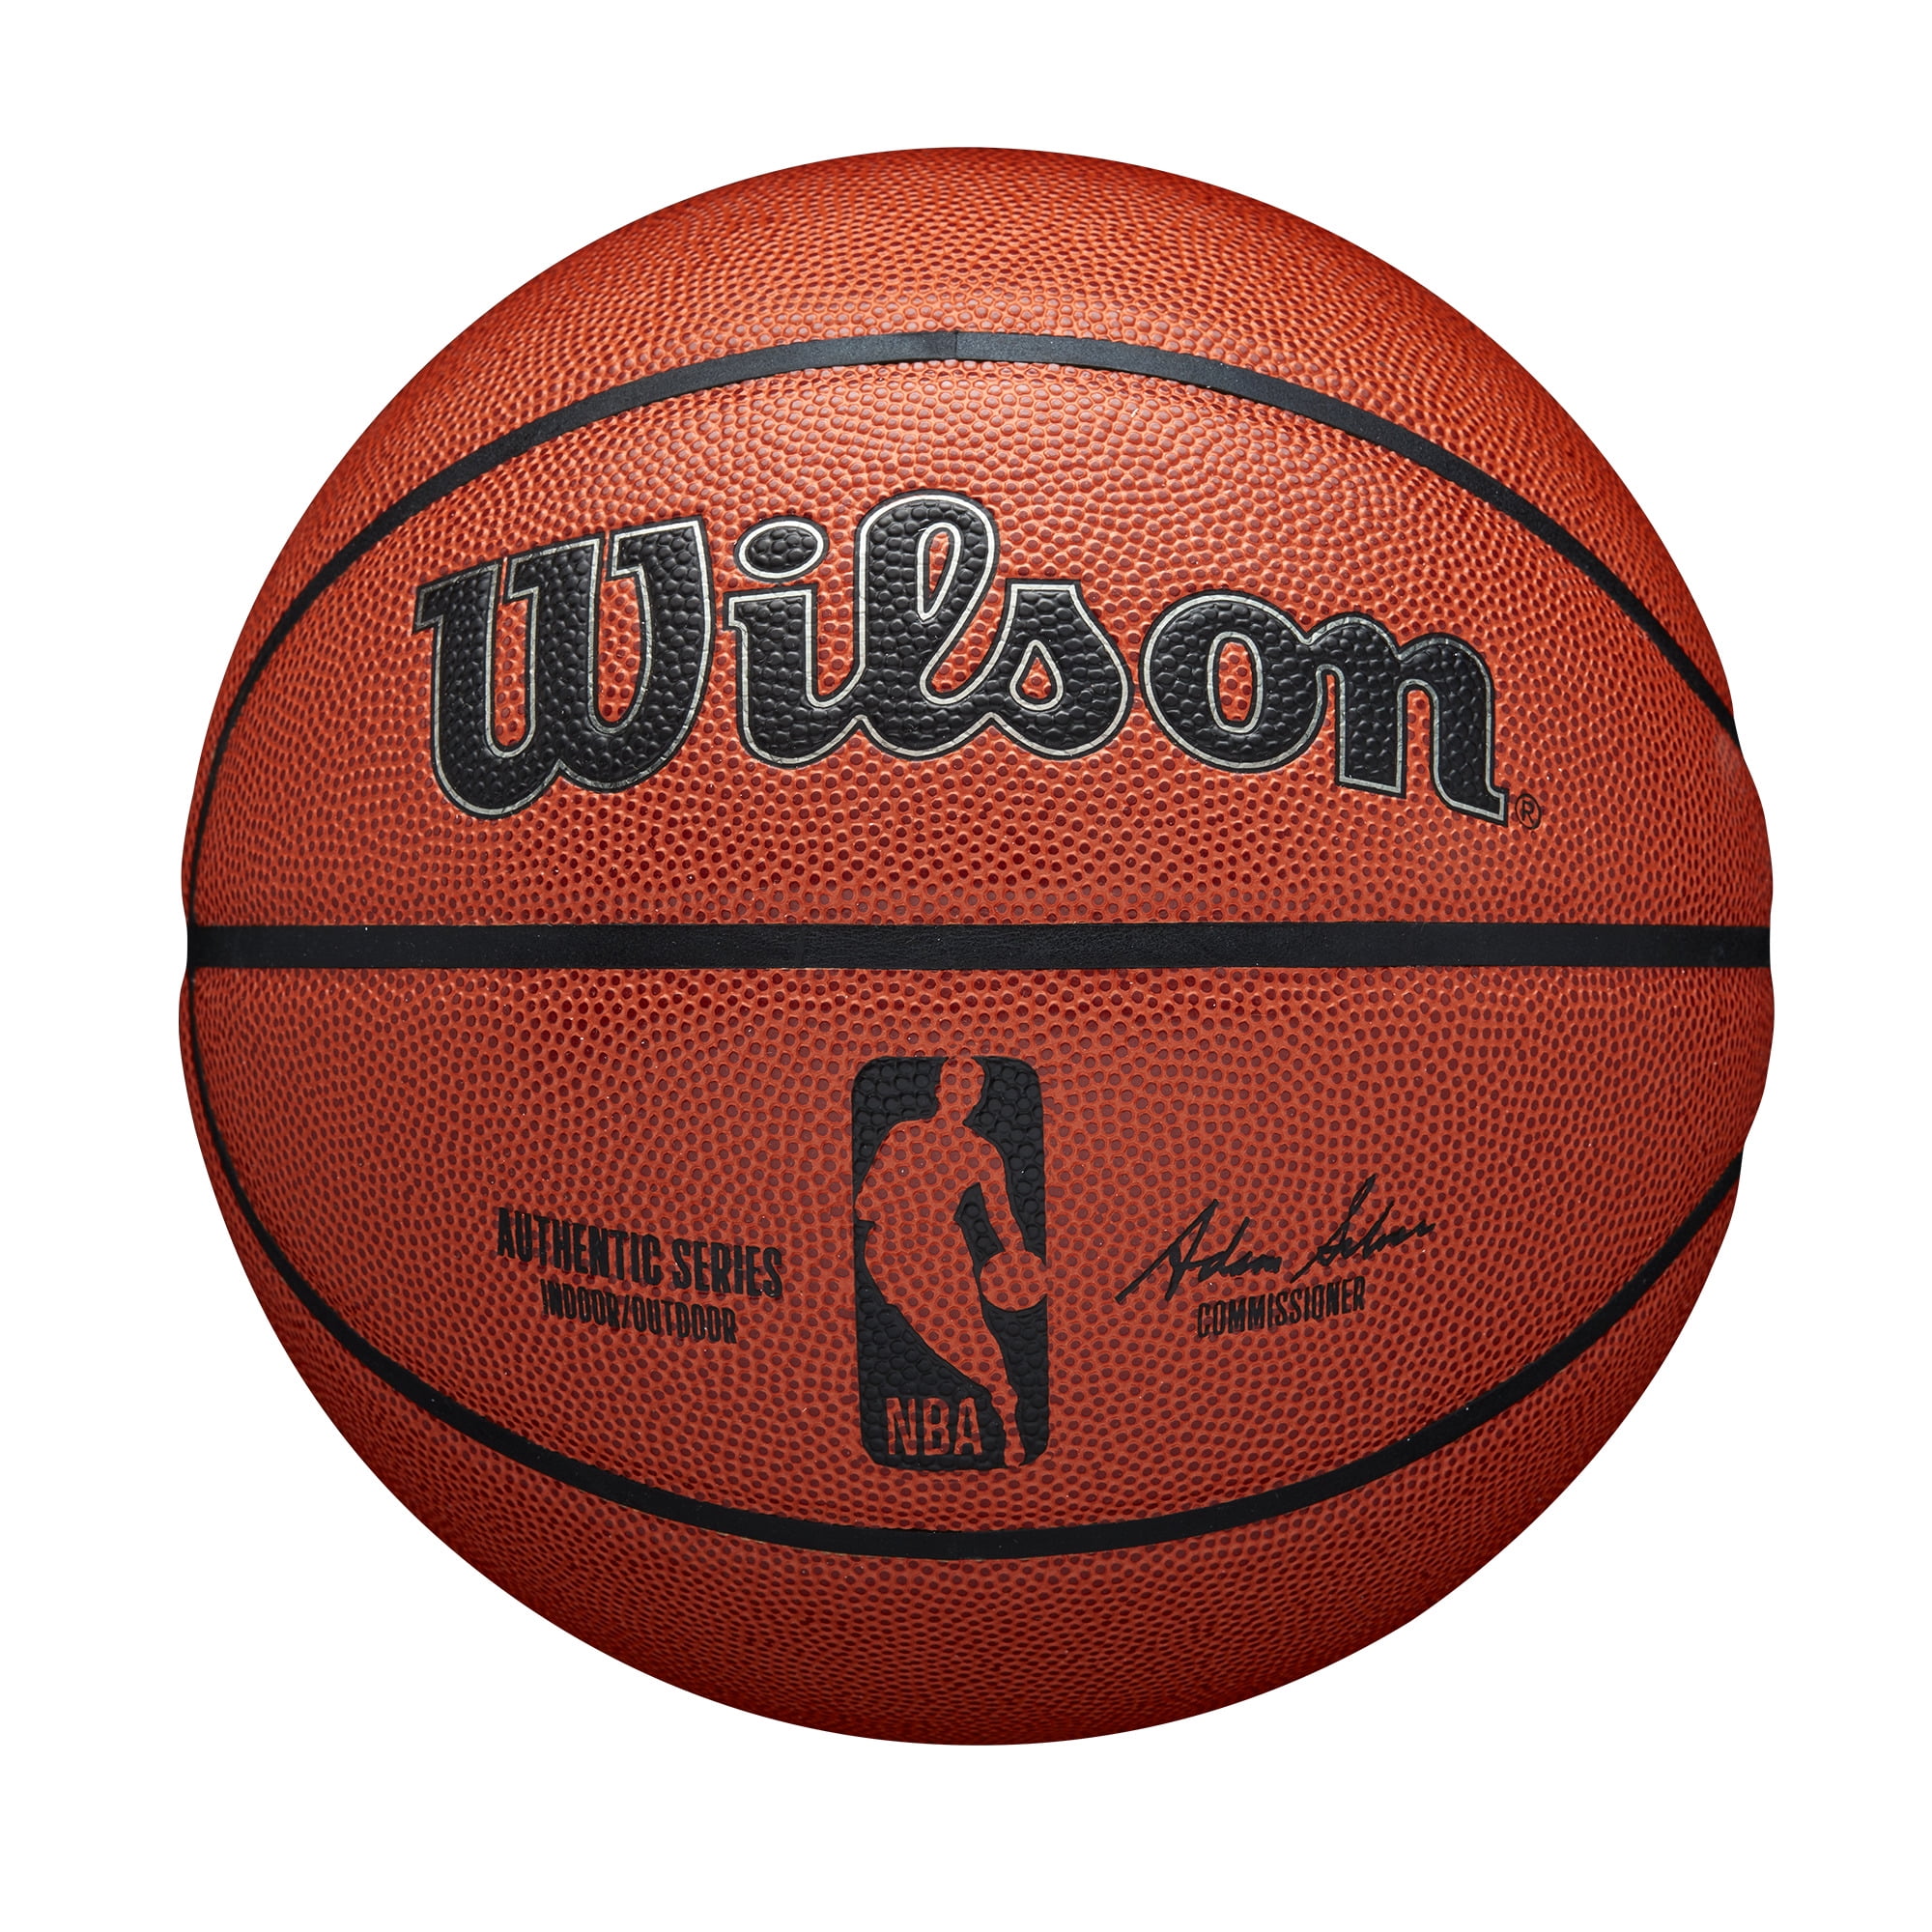 Basketball Indoor and Outdoor Sports Fun Games Moisture Absorbing Ball Brown New 